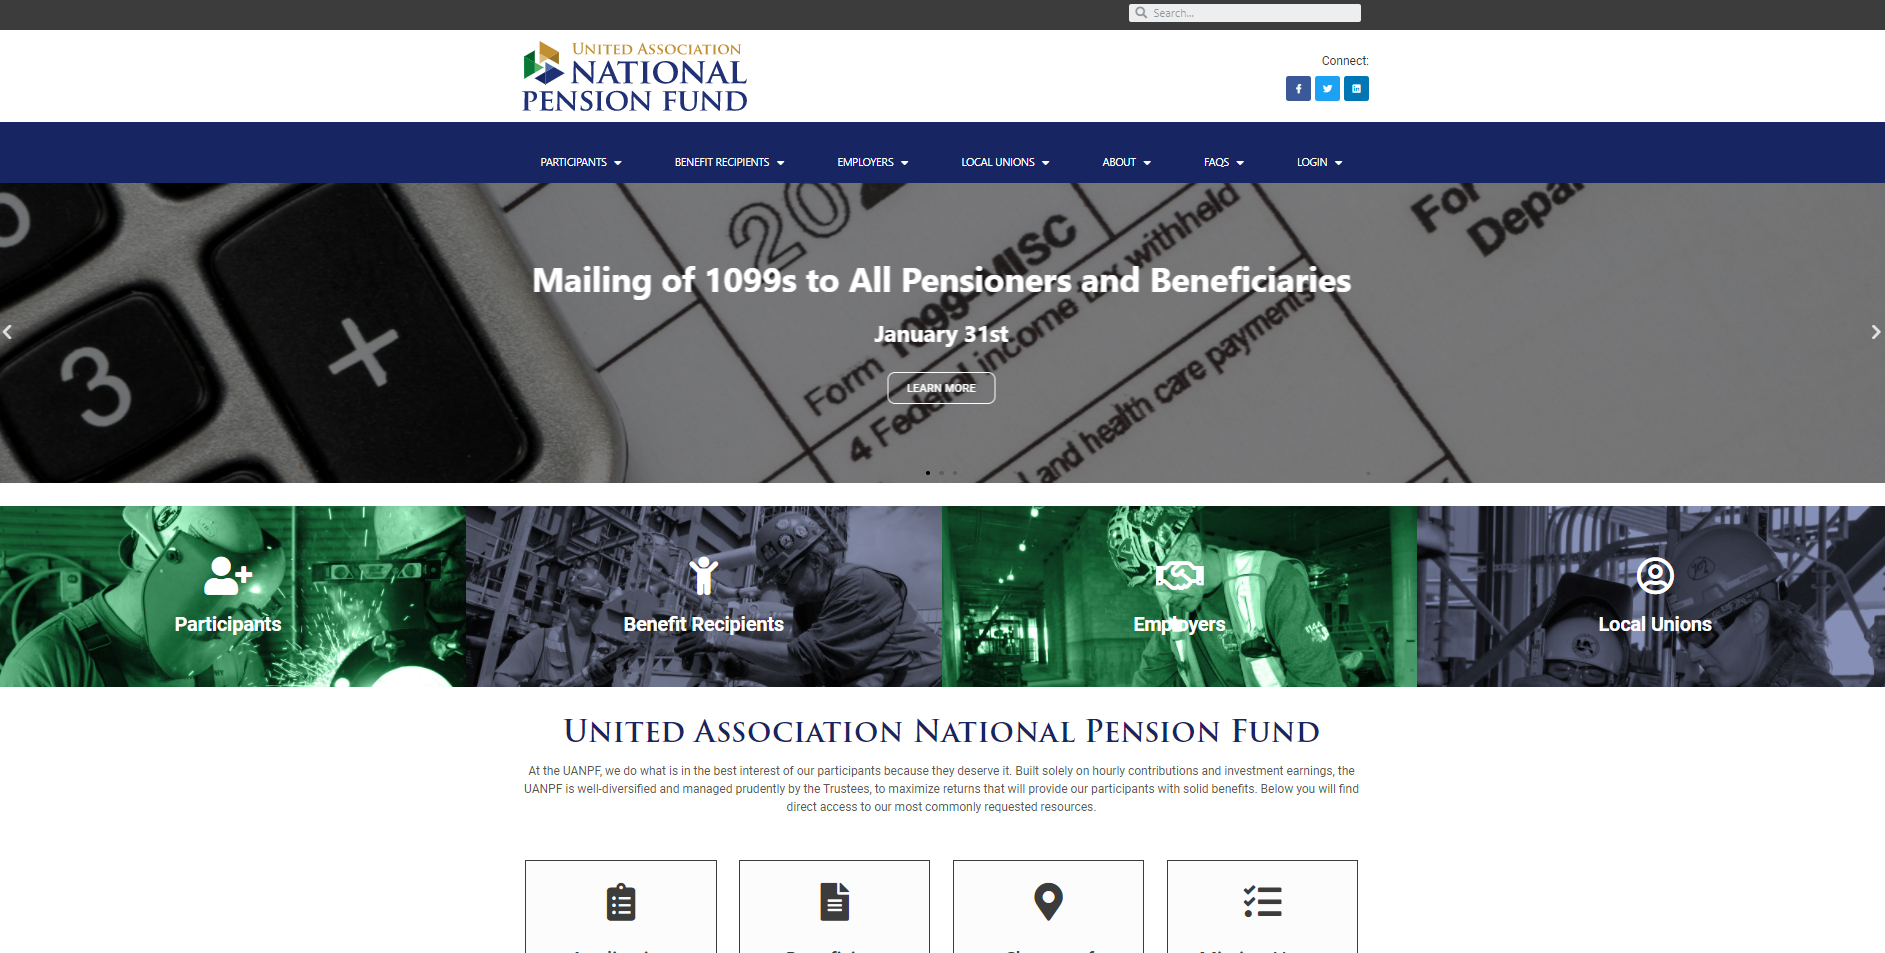 BMA Media Group - United Association National Pension Fund brand and website